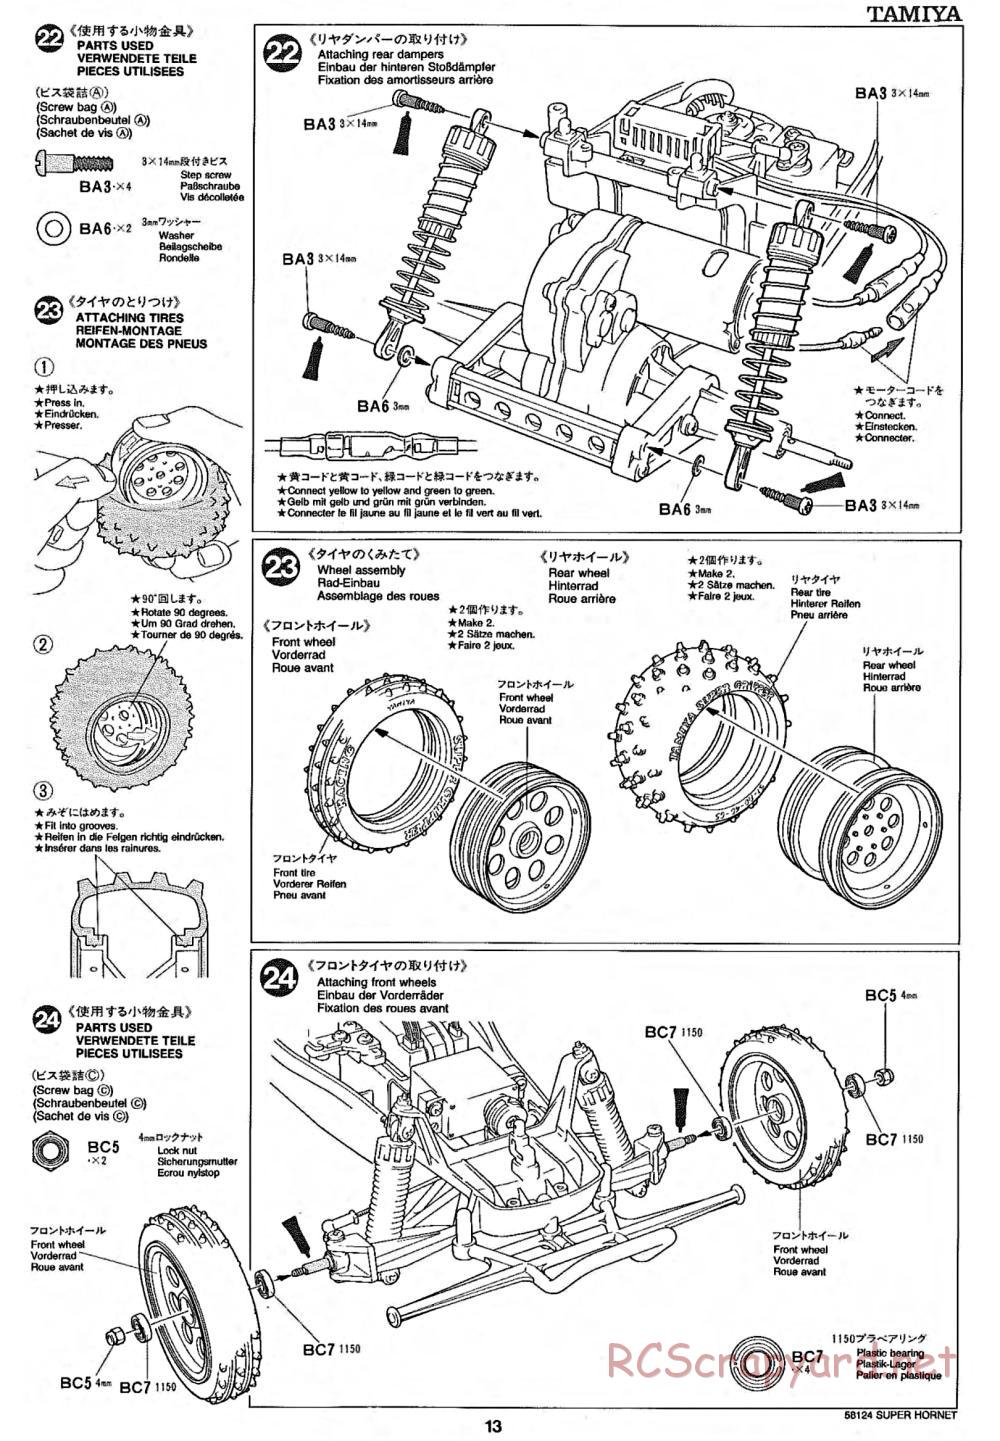 Tamiya - Super Hornet Chassis - Manual - Page 13